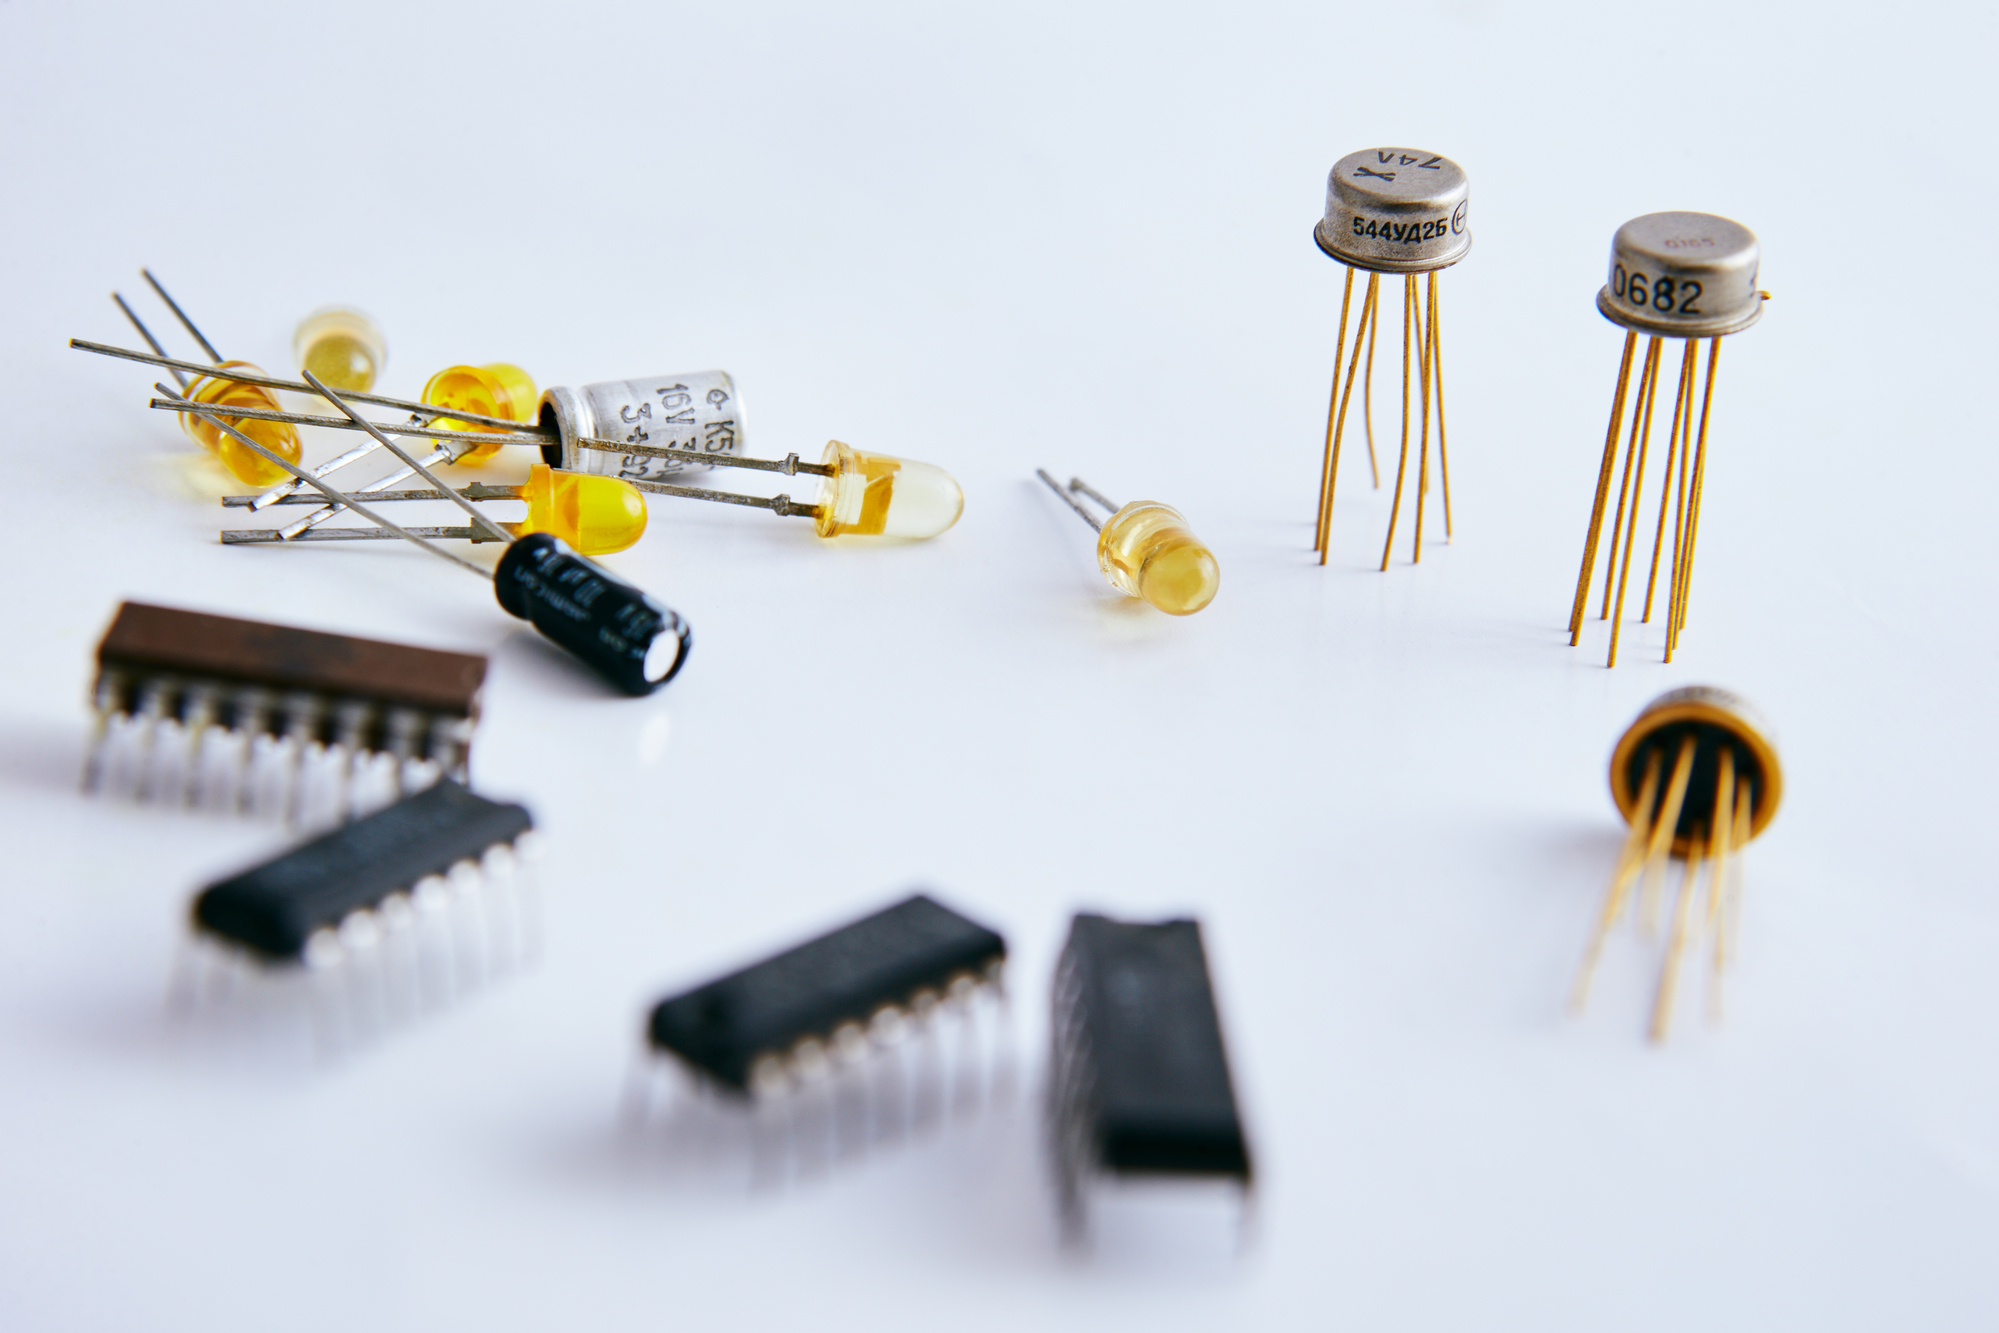 20 Common Electronics Components You Should have in your Electronics Lab